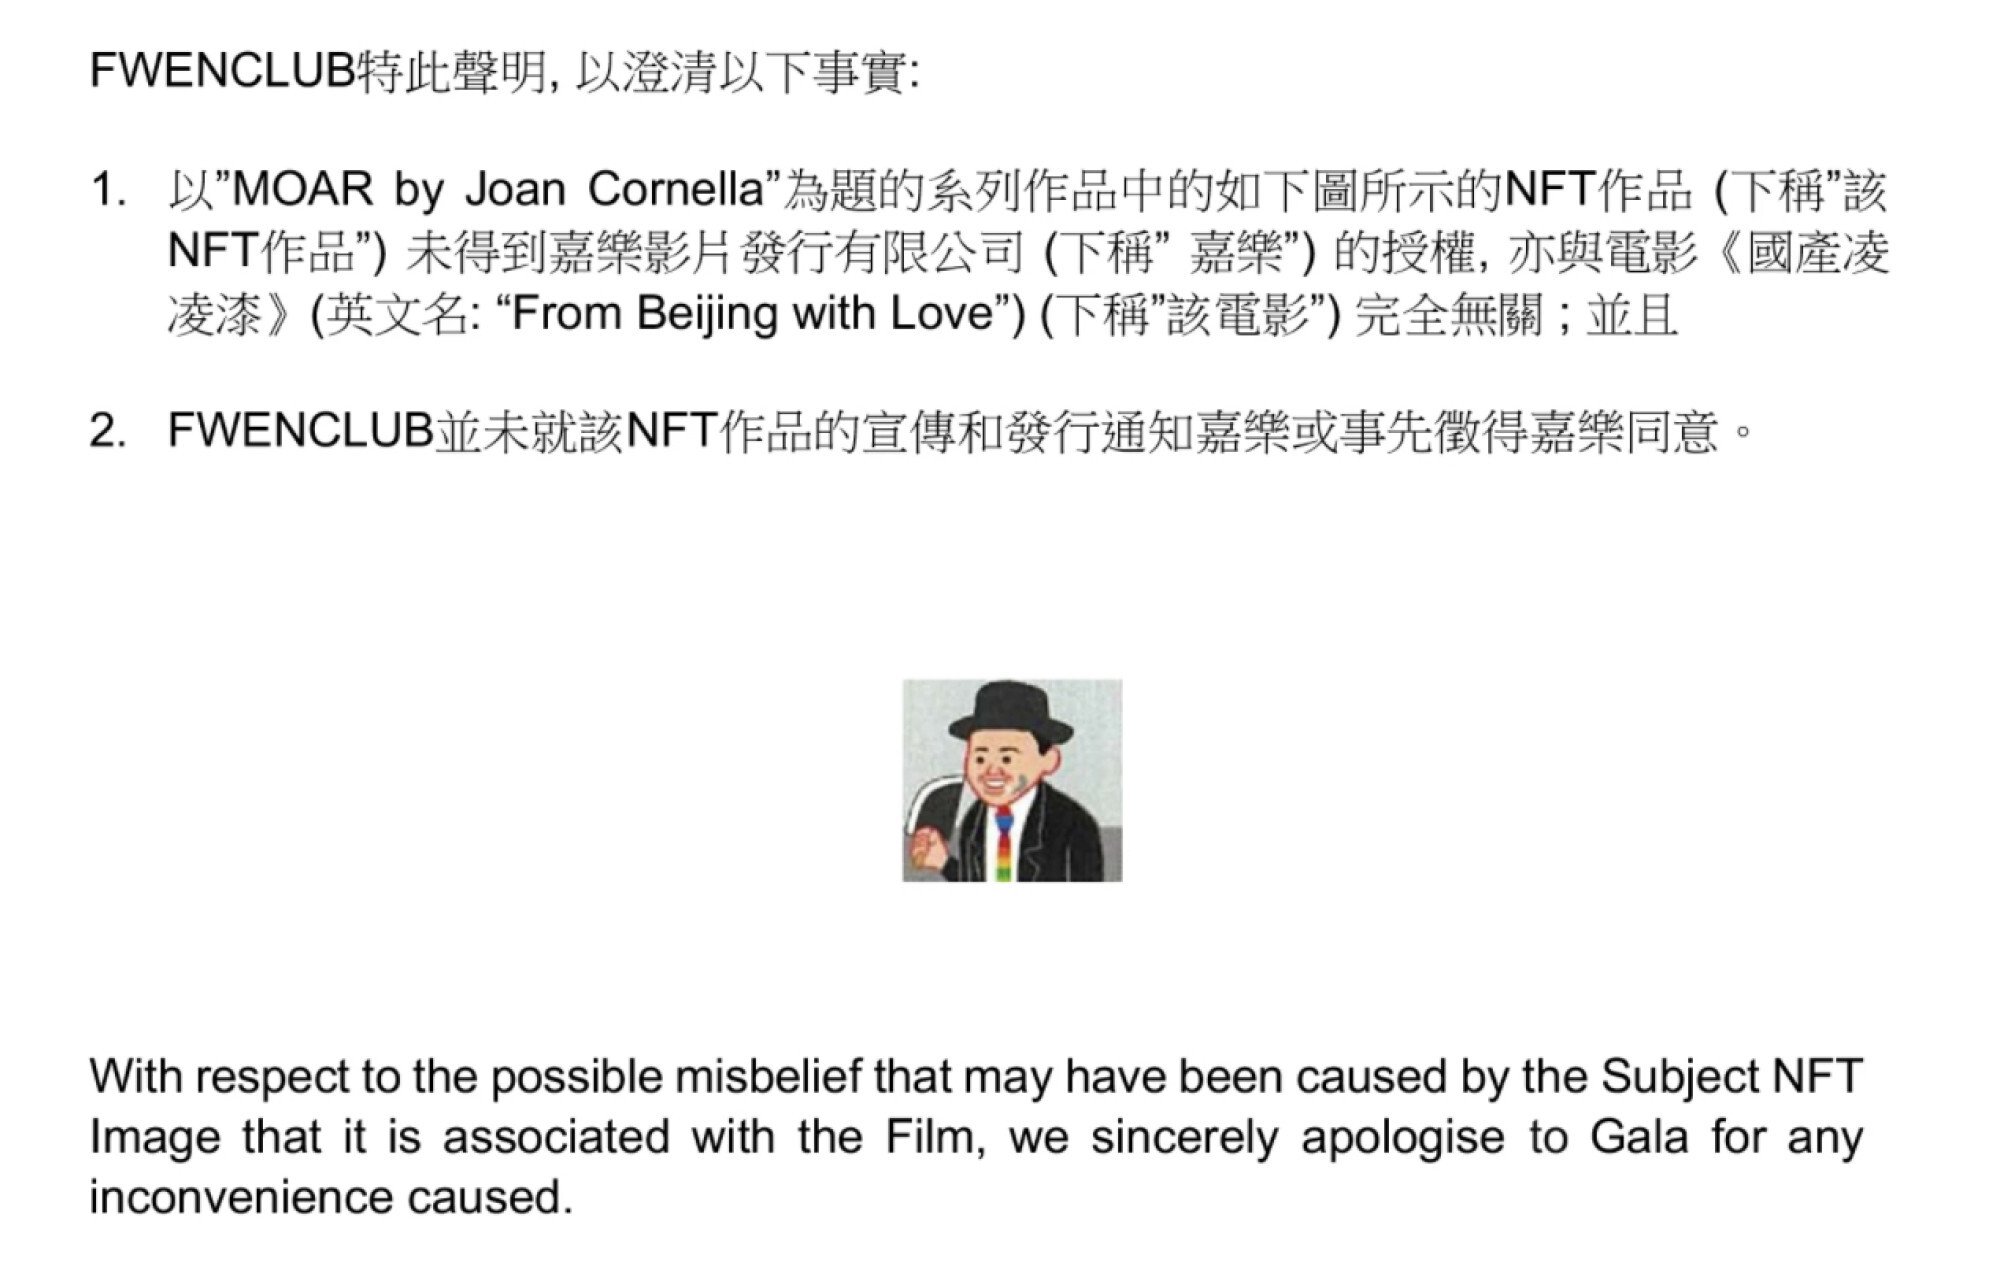 An apology issued by Fwenclub appears on the company’s website, along with an image of the NFT accused of infringing on the copyright of a Stephen Chow film. Photo: Screenshot